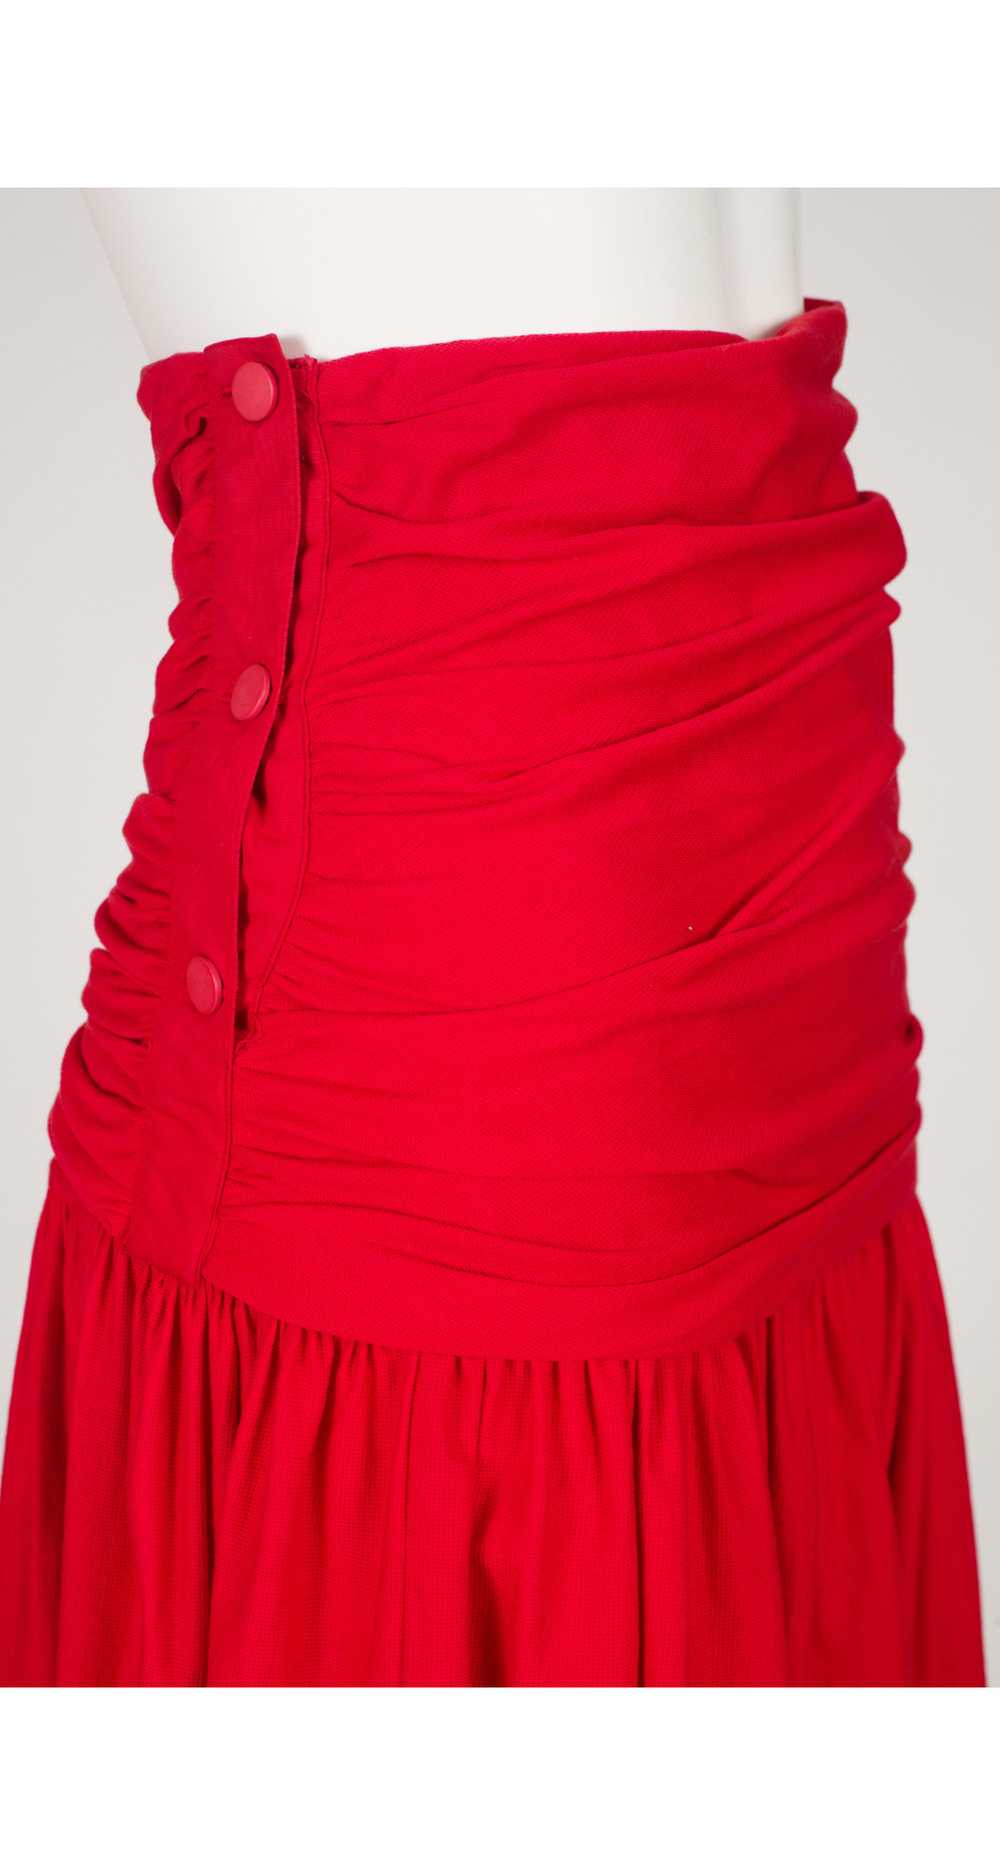 Callaghan by Gianni Versace 1980s Ruched Red Cott… - image 3